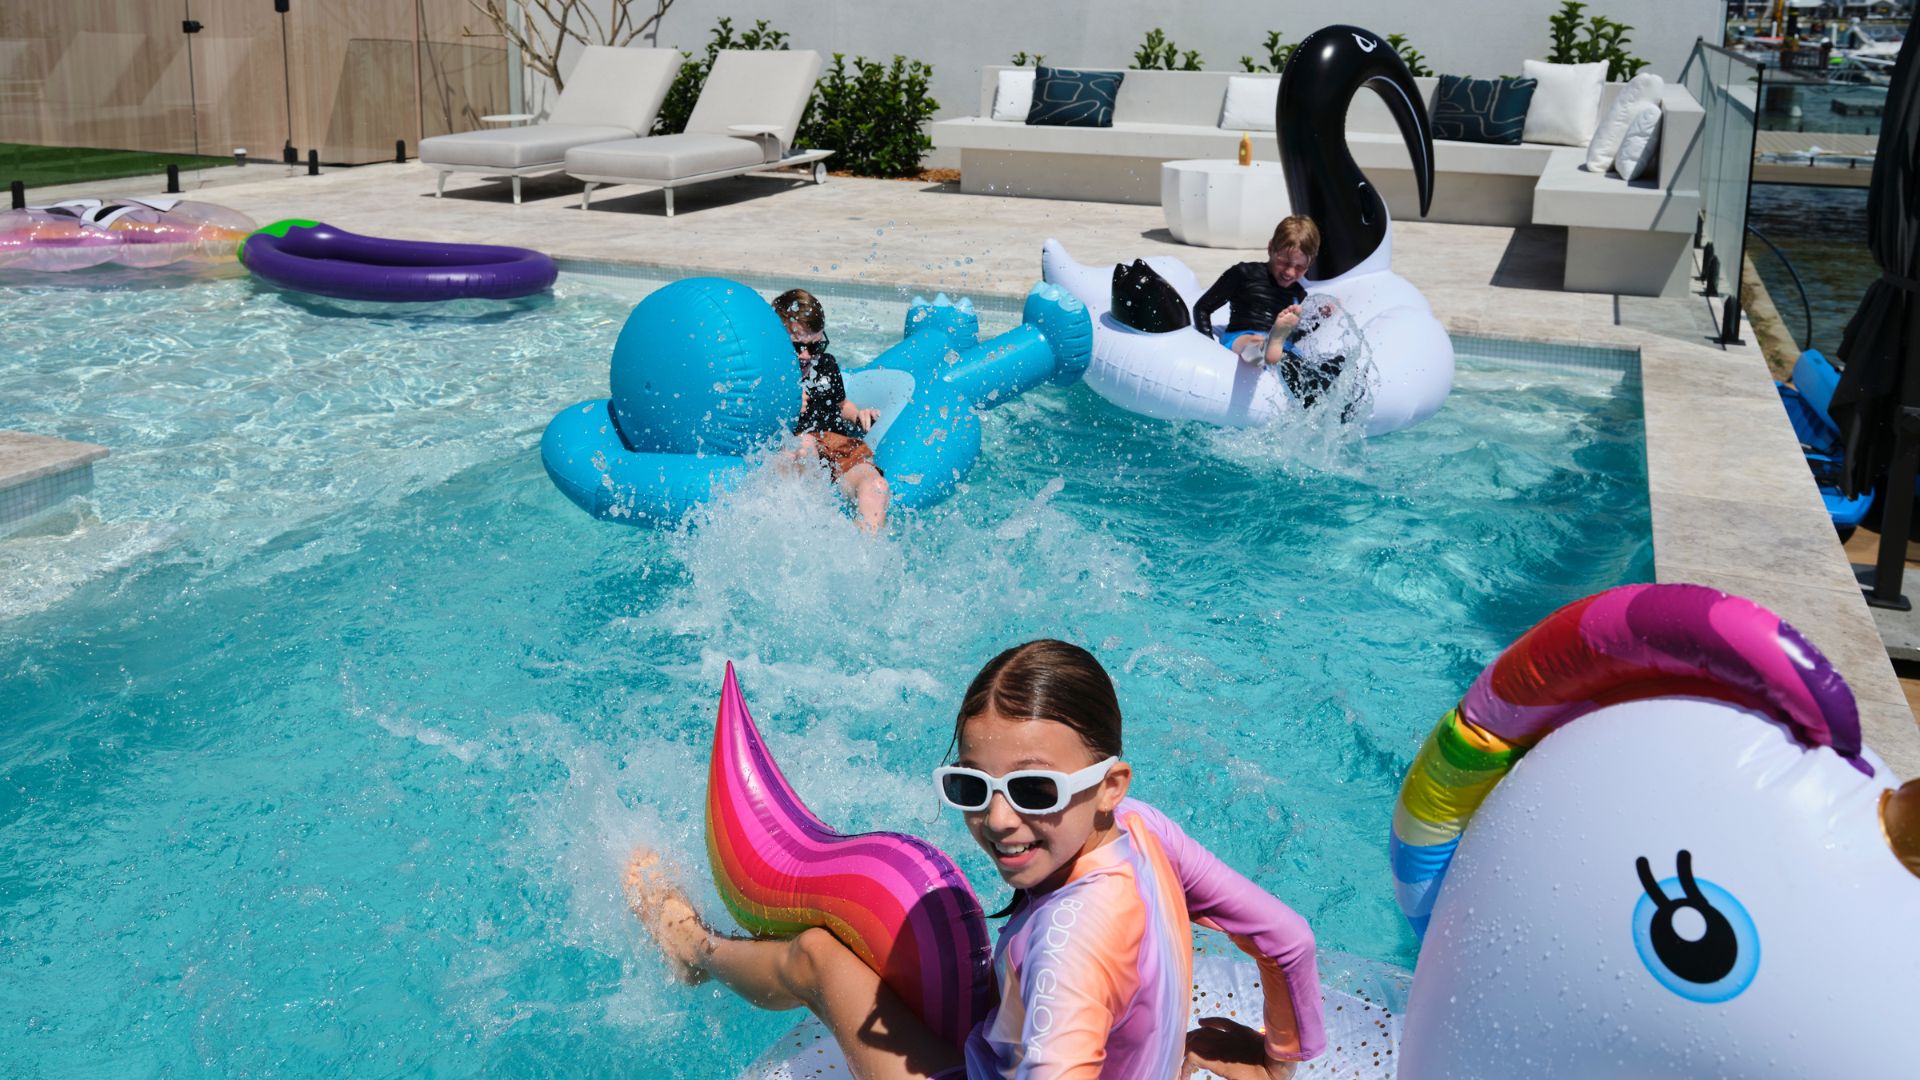 Host a summer pool party with family and friends this holiday